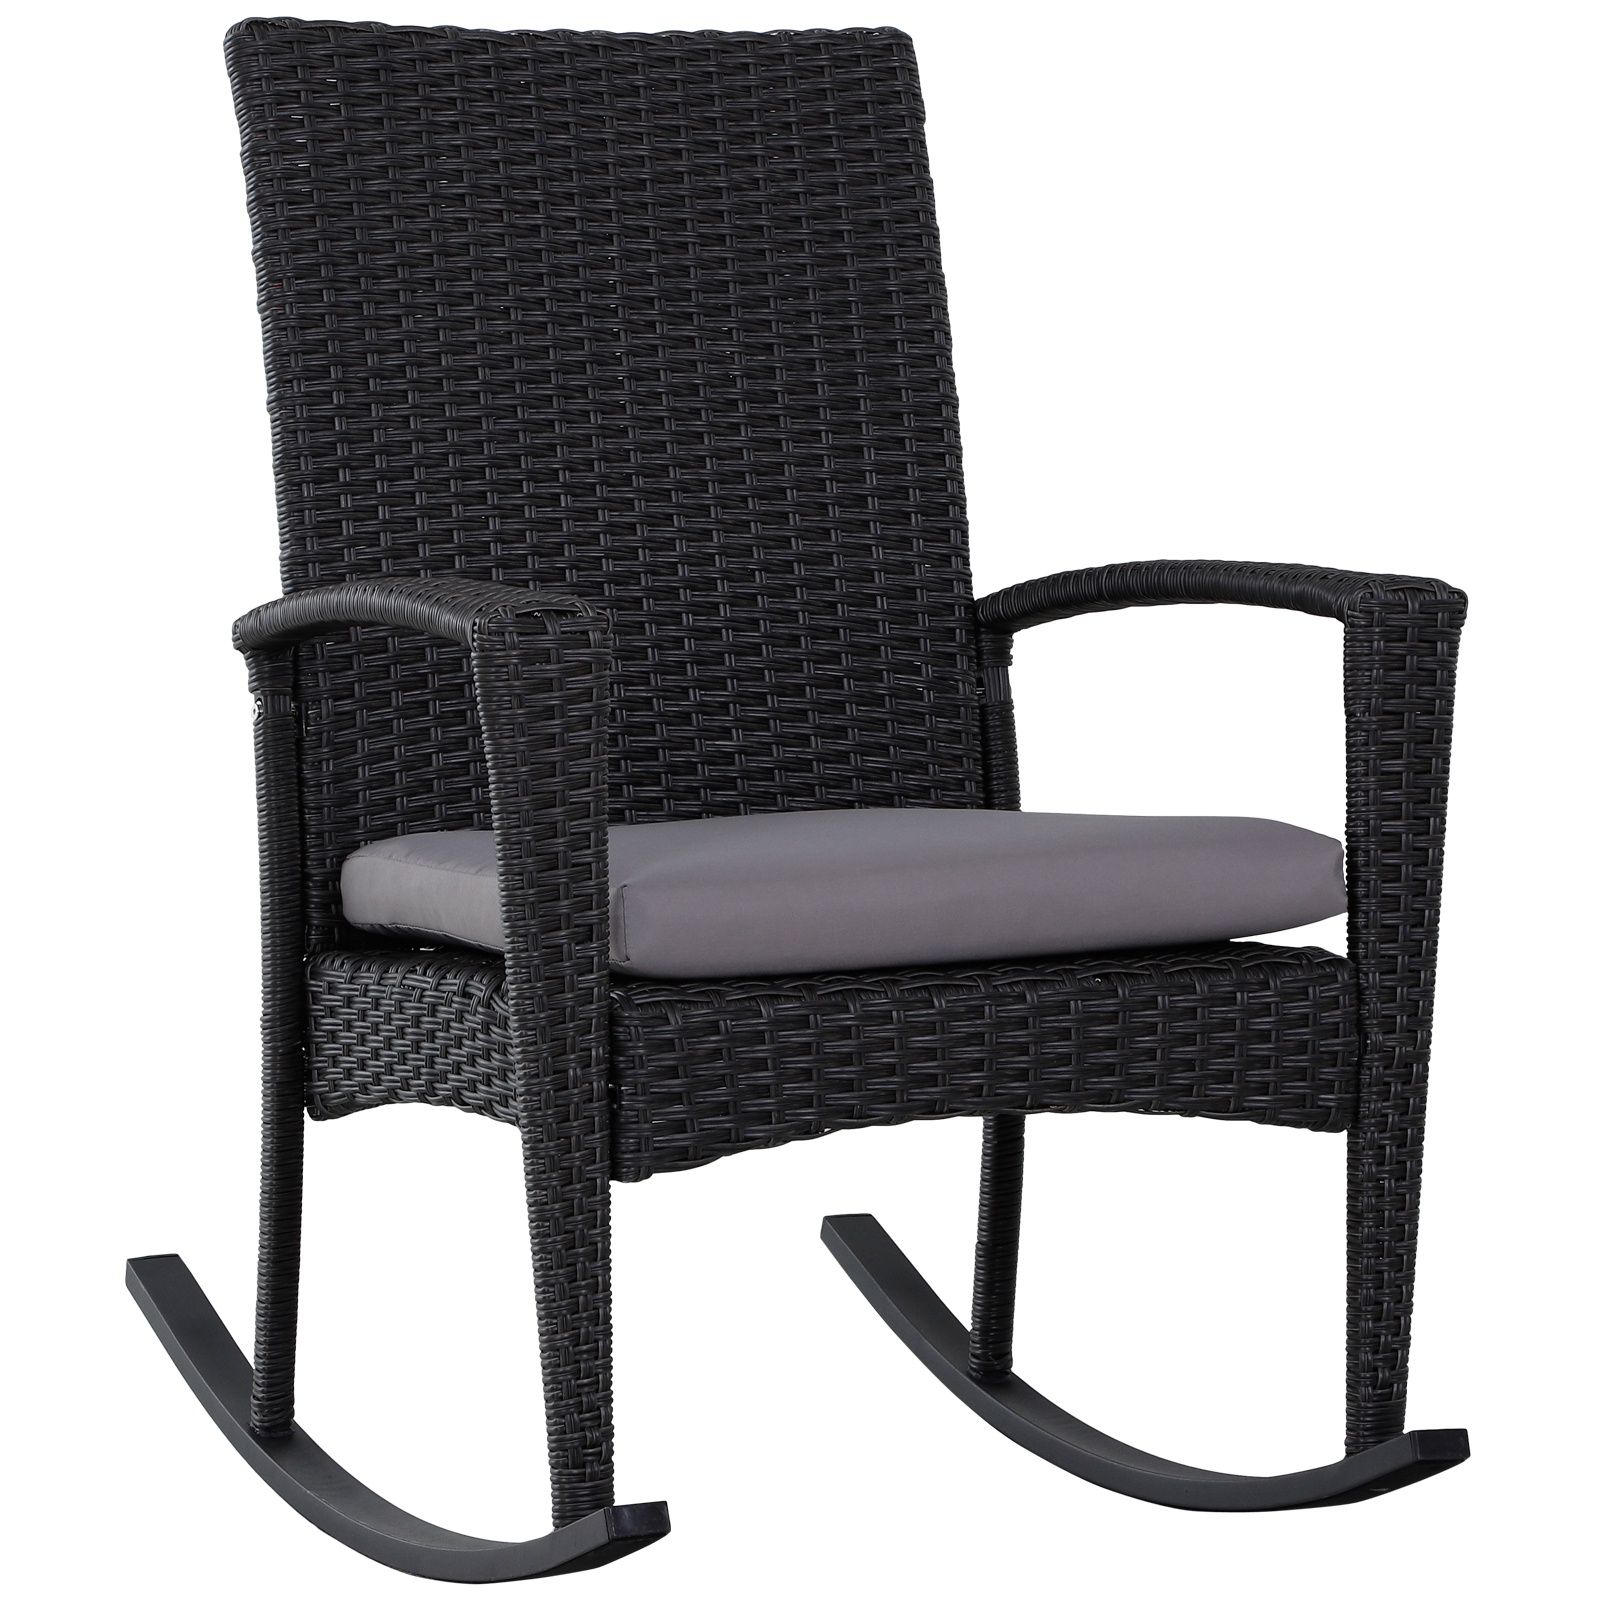 Fashionable Dark Natural Rocking Chairs Within Outsunny Pe Rattan Outdoor Garden Rocking Chair W/ Cushion Grey (View 8 of 15)